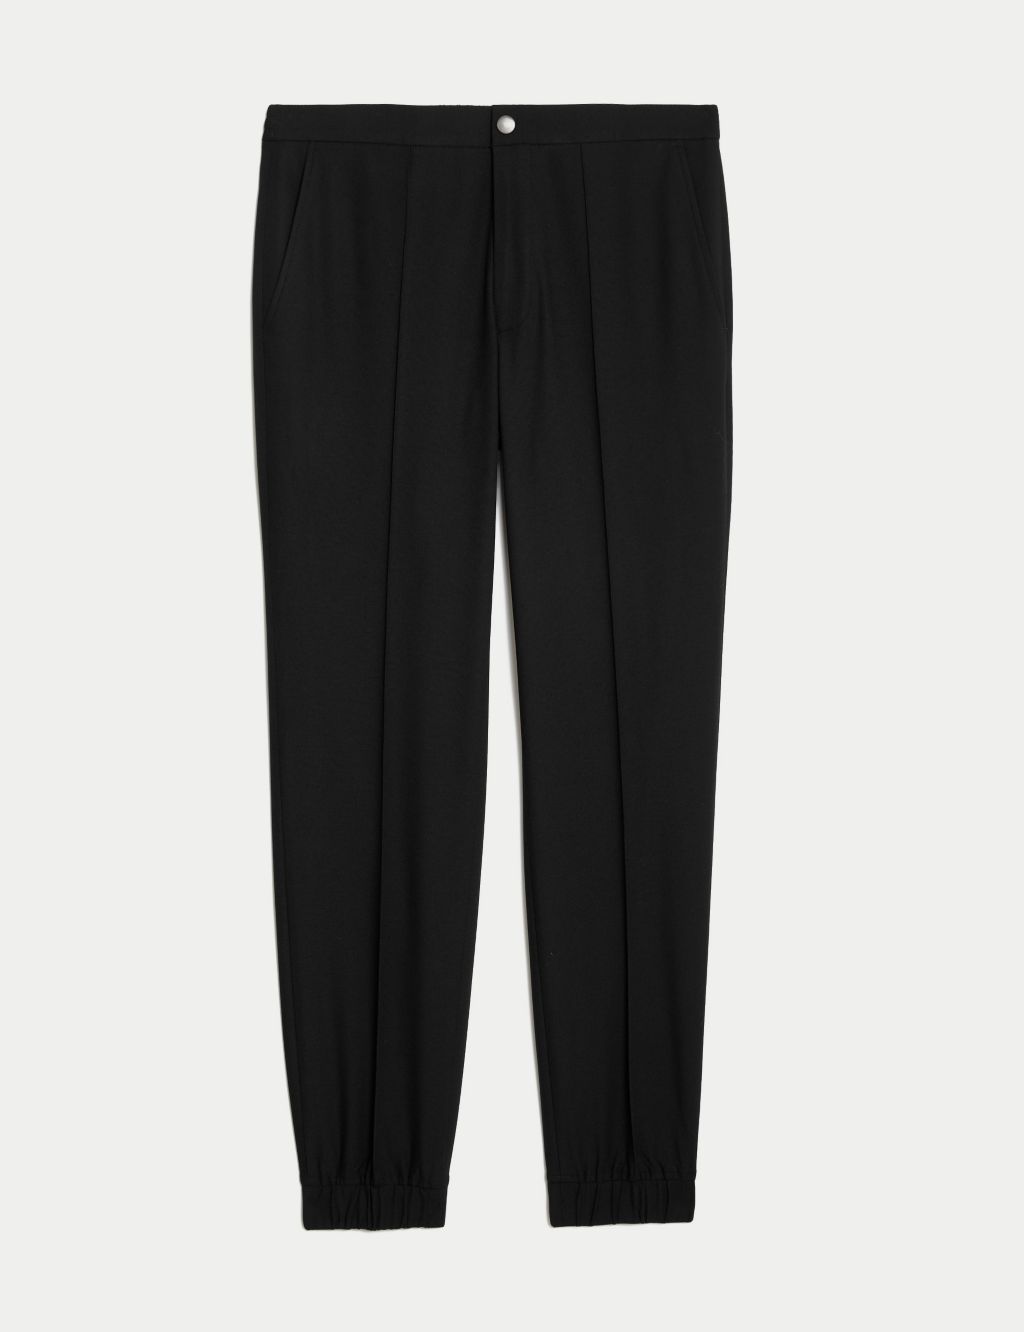 Tailored Fit Flat Front Textured Trousers image 8